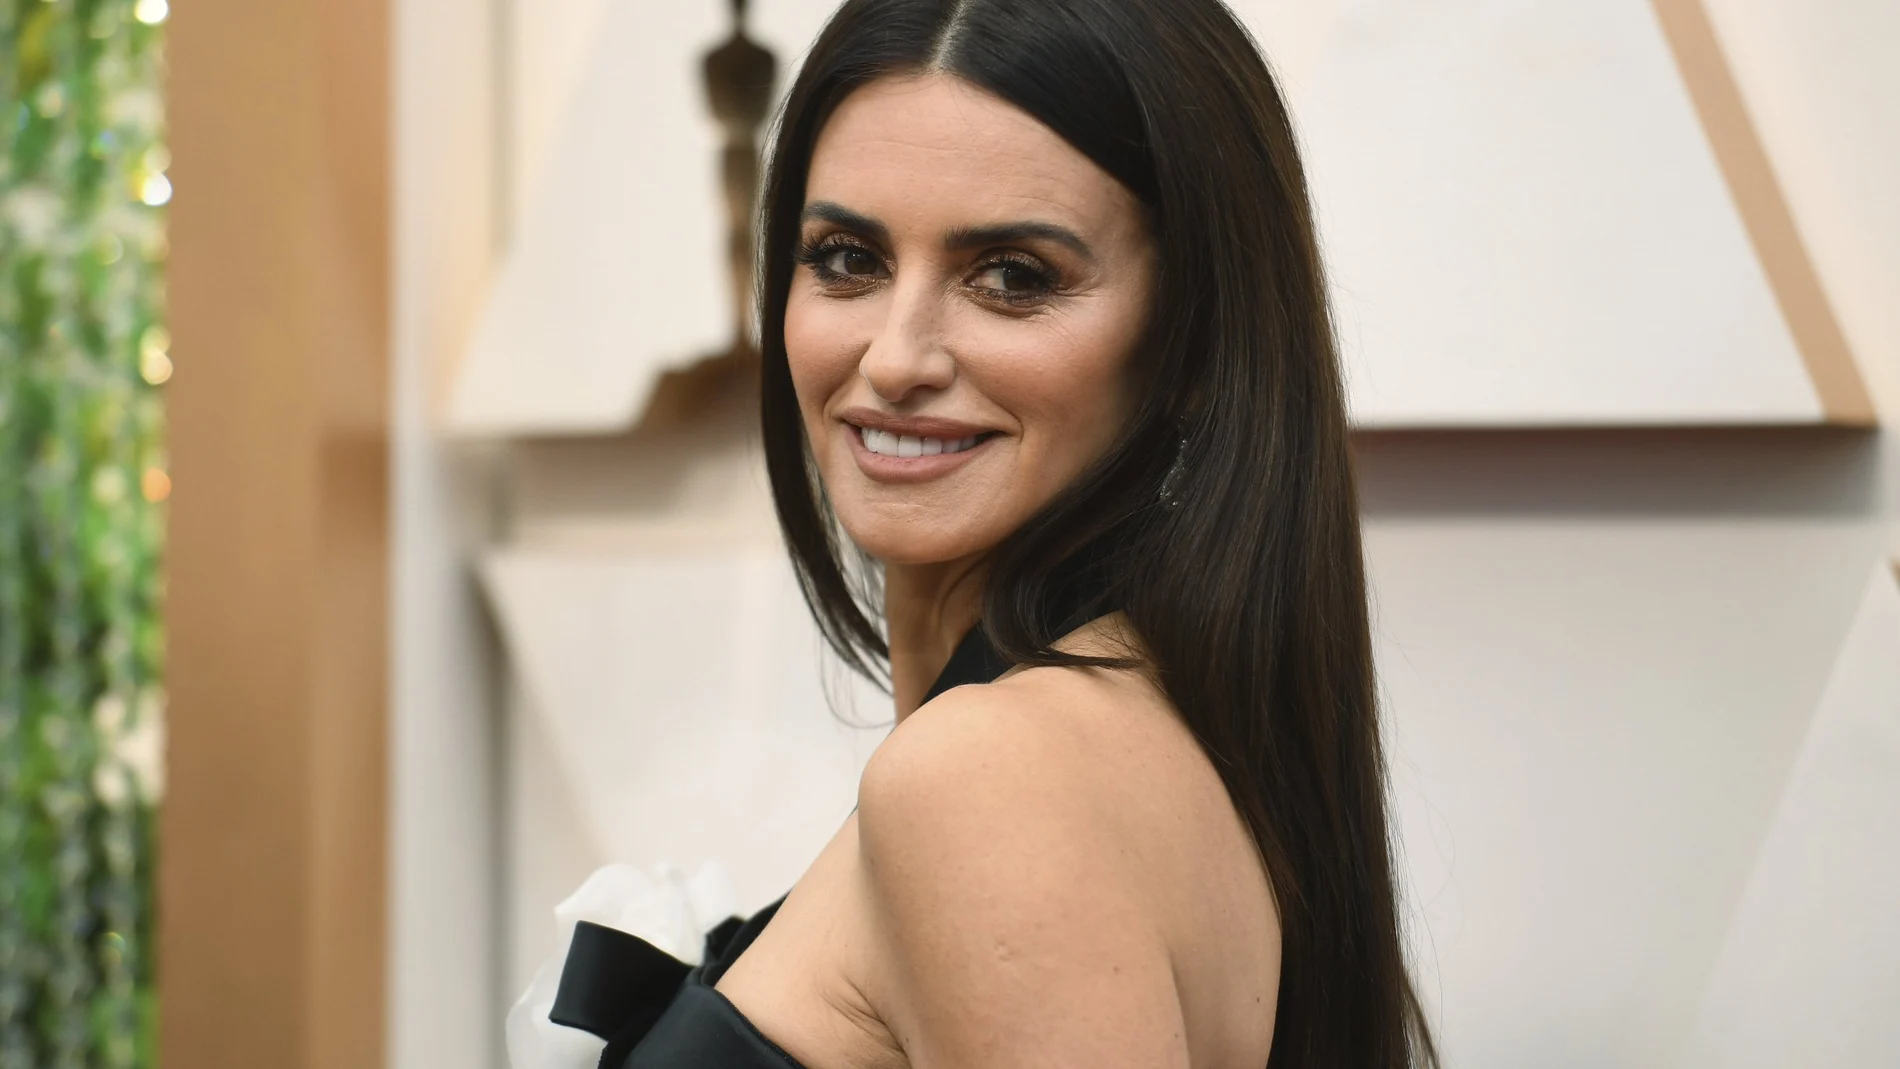 Penelope Cruz arrives at the Oscars on Sunday, Feb. 9, 2020, at the Dolby Theatre in Los Angeles. (Photo by Richard Shotwell/Invision/AP)